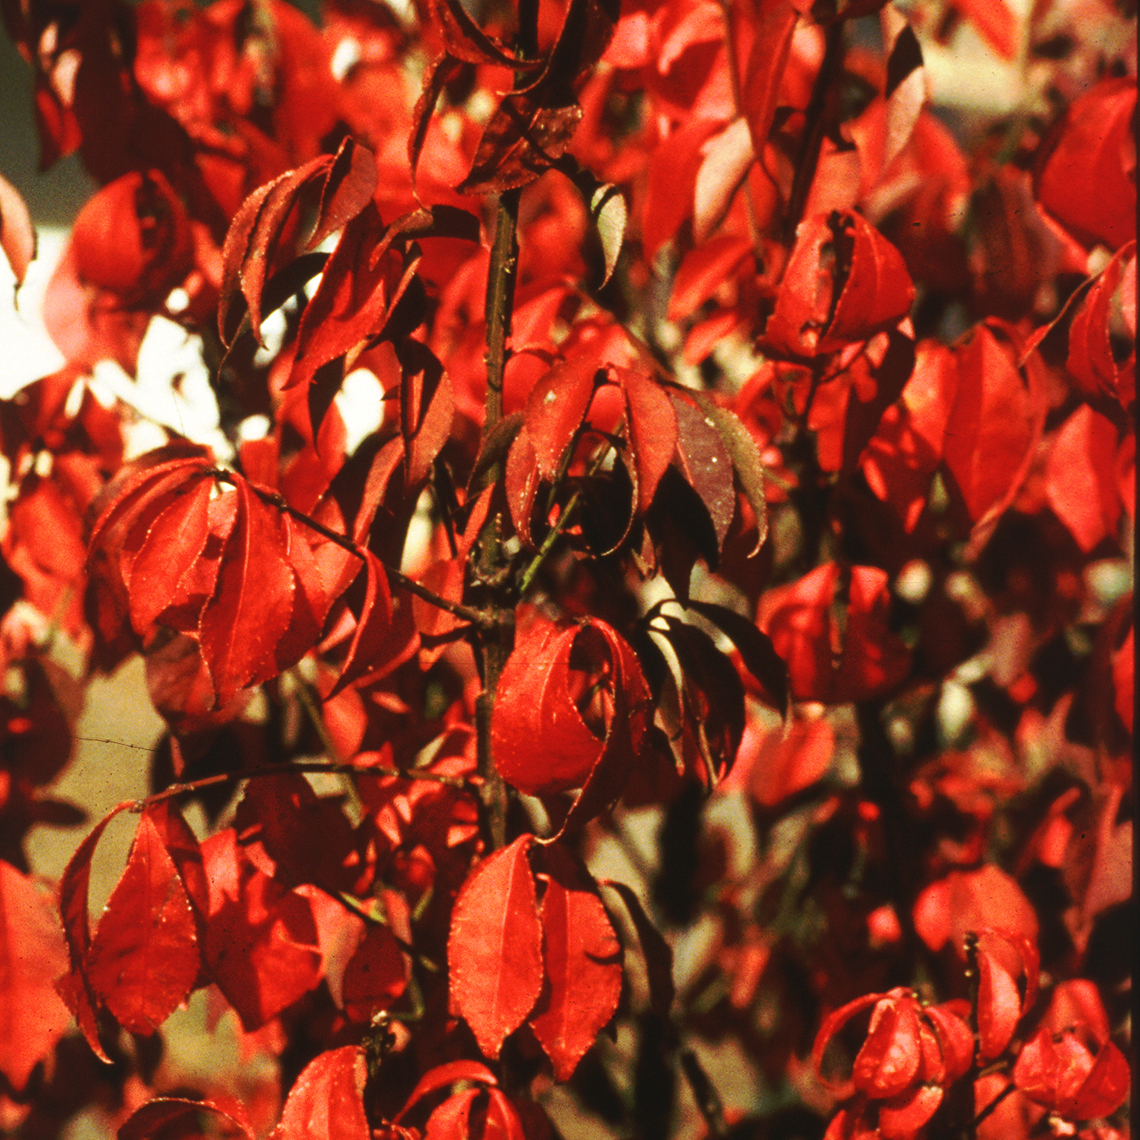 Close up of Chicago Fire Euonymus vibrant red foliage